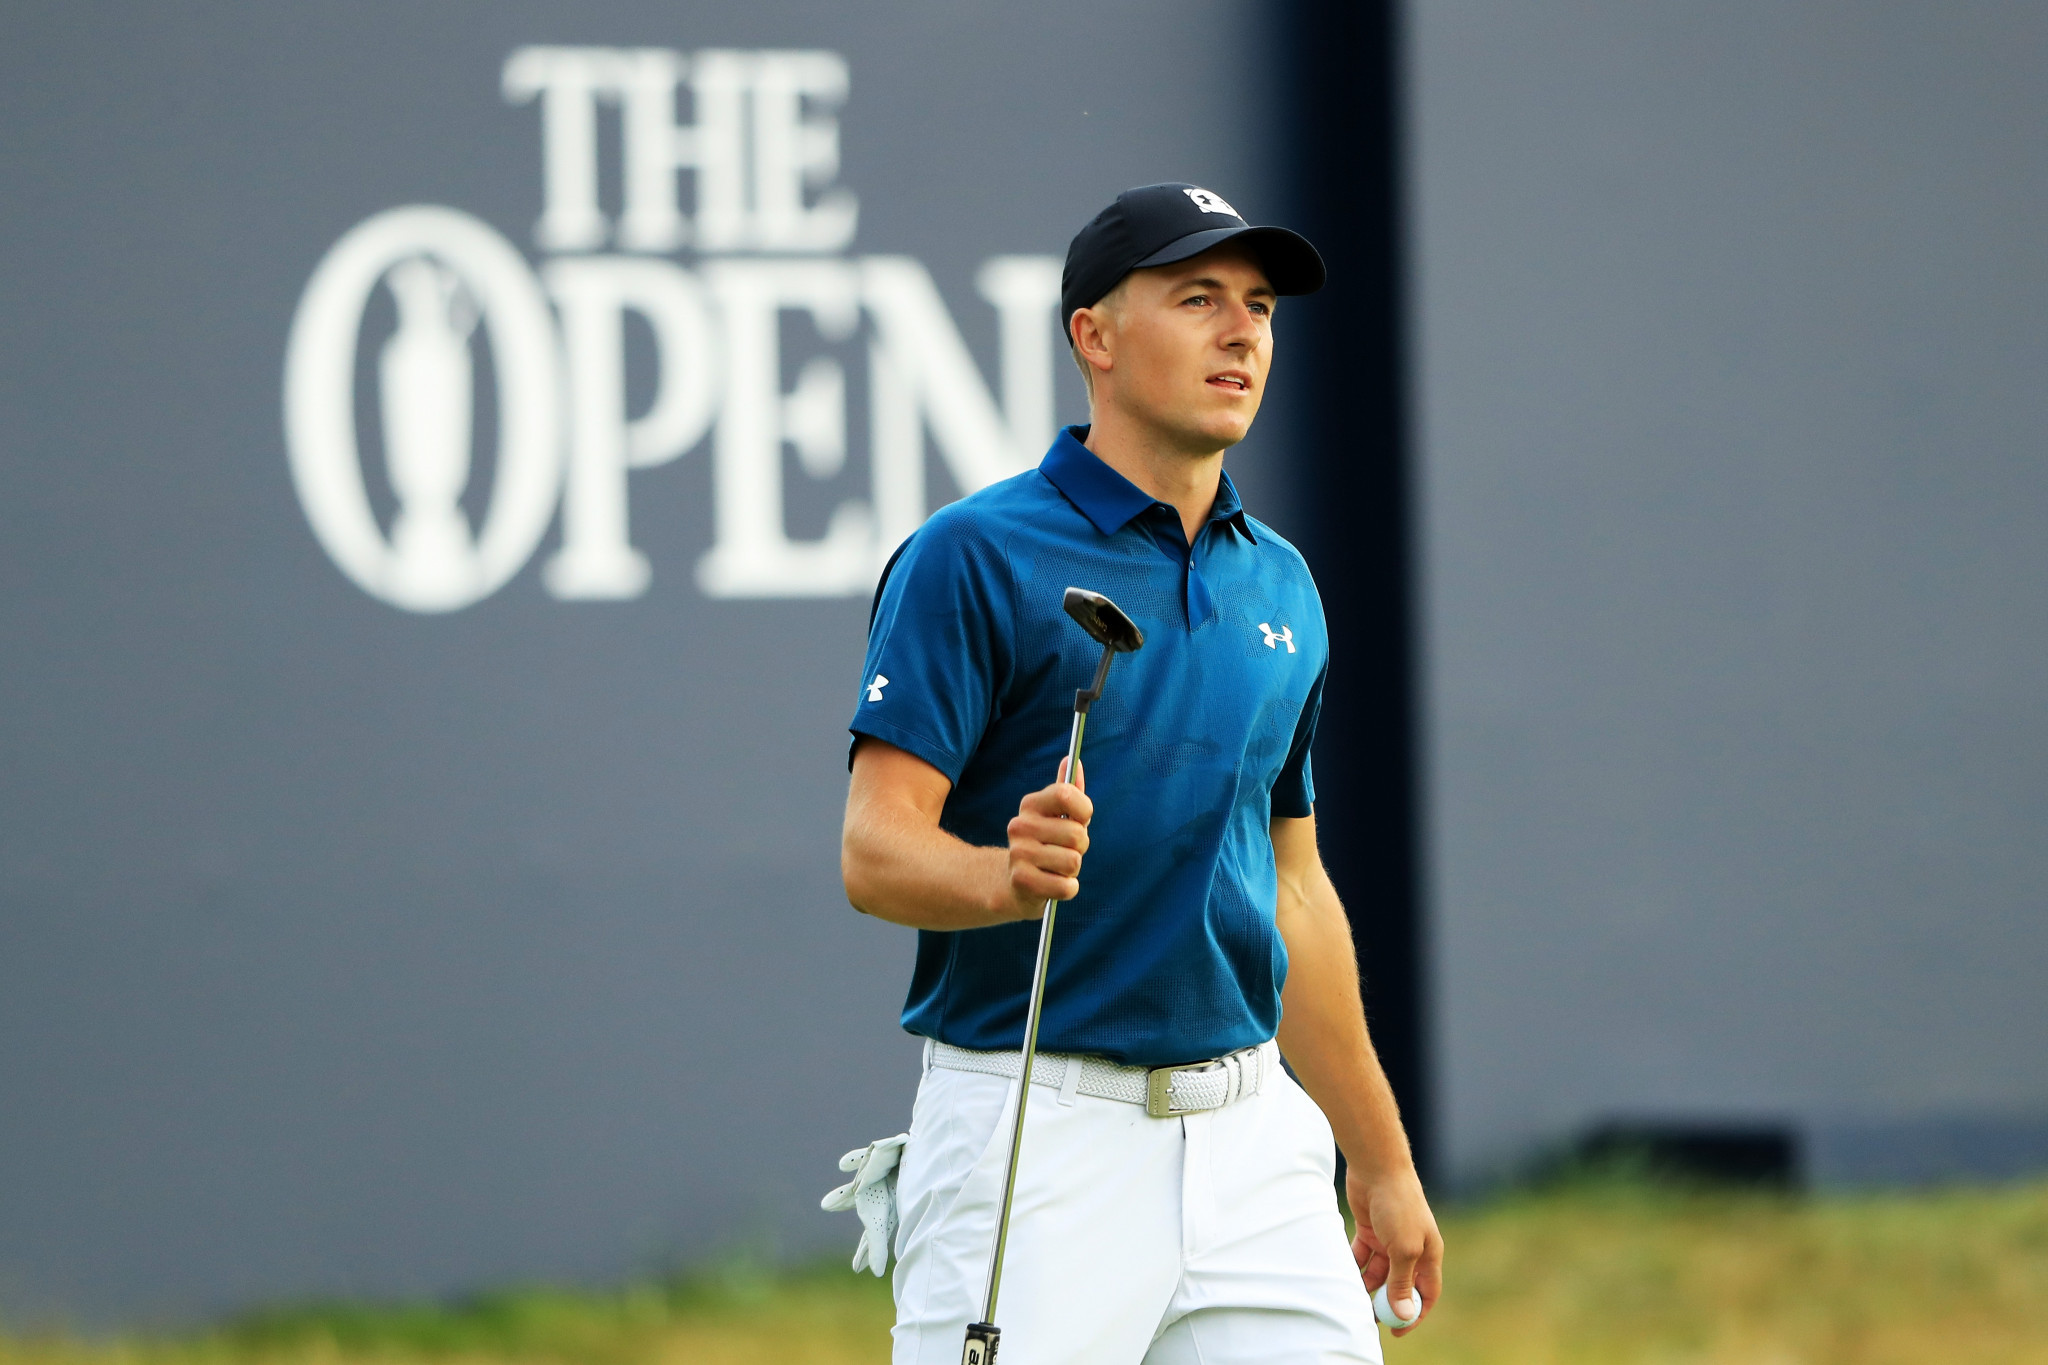 Jordan Spieth is well positioned to defend his Open crown going into the final day at Carnoustie in Scotland ©Getty Images